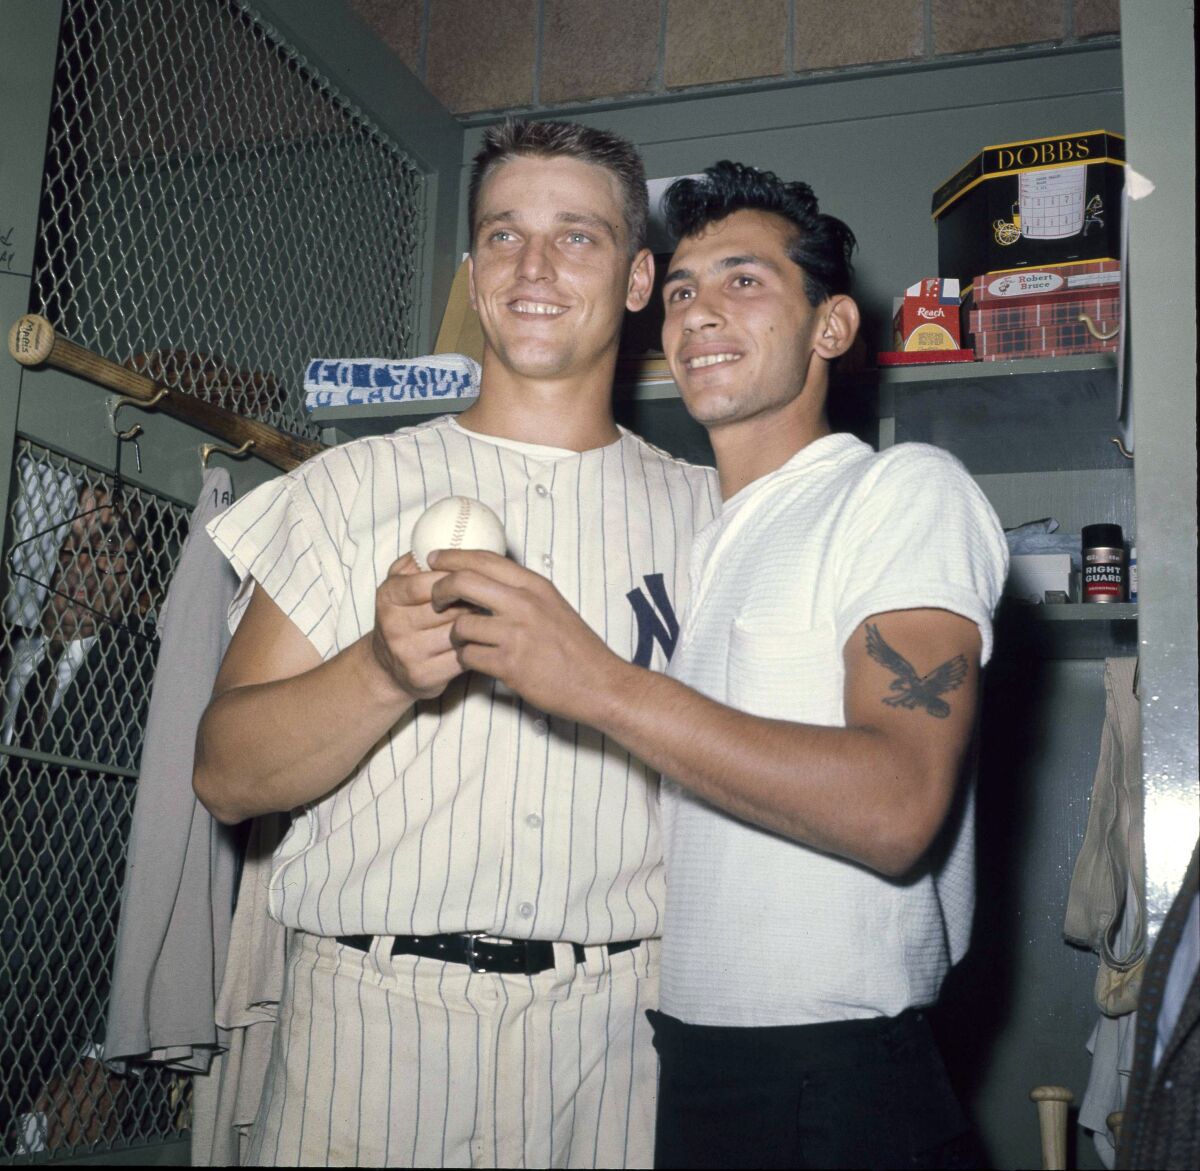 FILE - New York Yankees slugger Roger Maris poses with fan Sal Durante in the locker room at Yankee Stadium, Oct. 1, 1961, after hitting his 61st home run of the season. Durante caught Maris' fourth inning home run into the right field seats as Maris broke Babe Ruth's single-season home run record. If Aaron Judge passes Roger Maris, some lucky fan might become this generation's Sal Durante. (AP Photo/File)